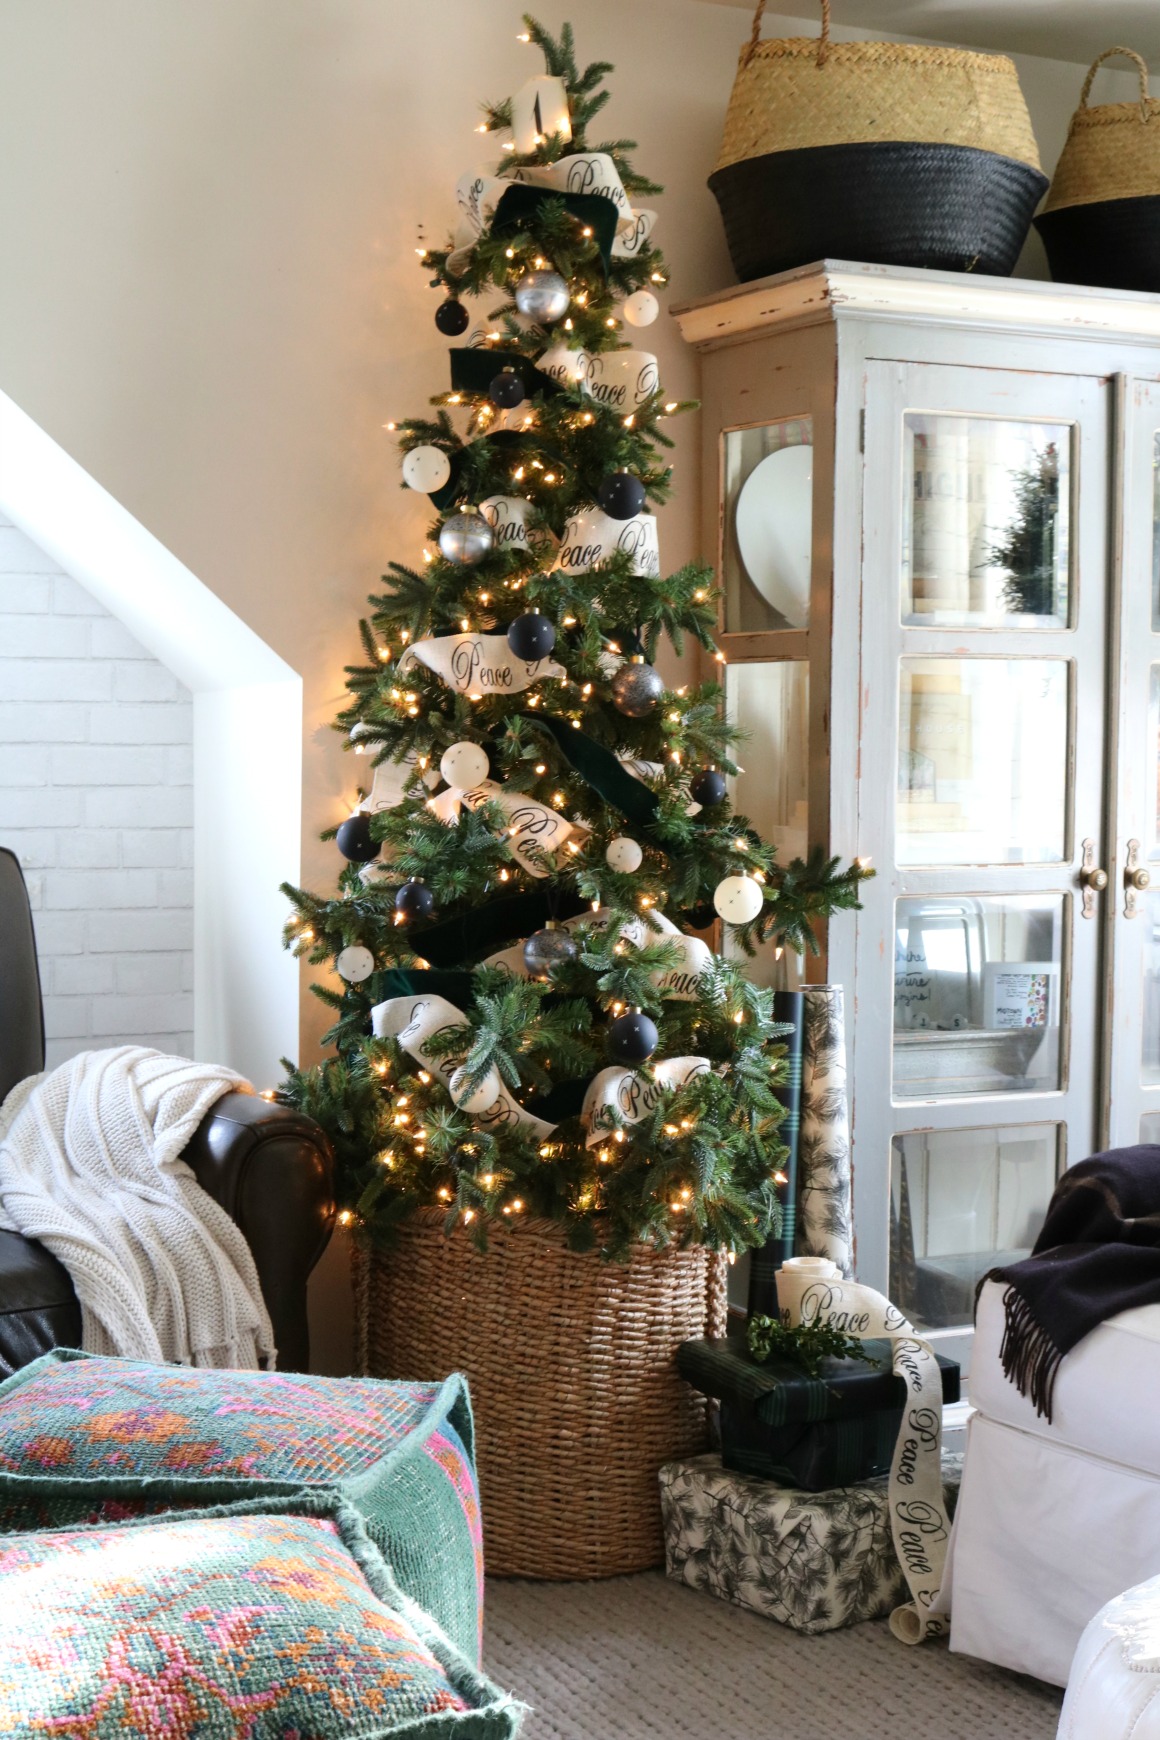 Christmas Decor in a Small Cape- Family Room